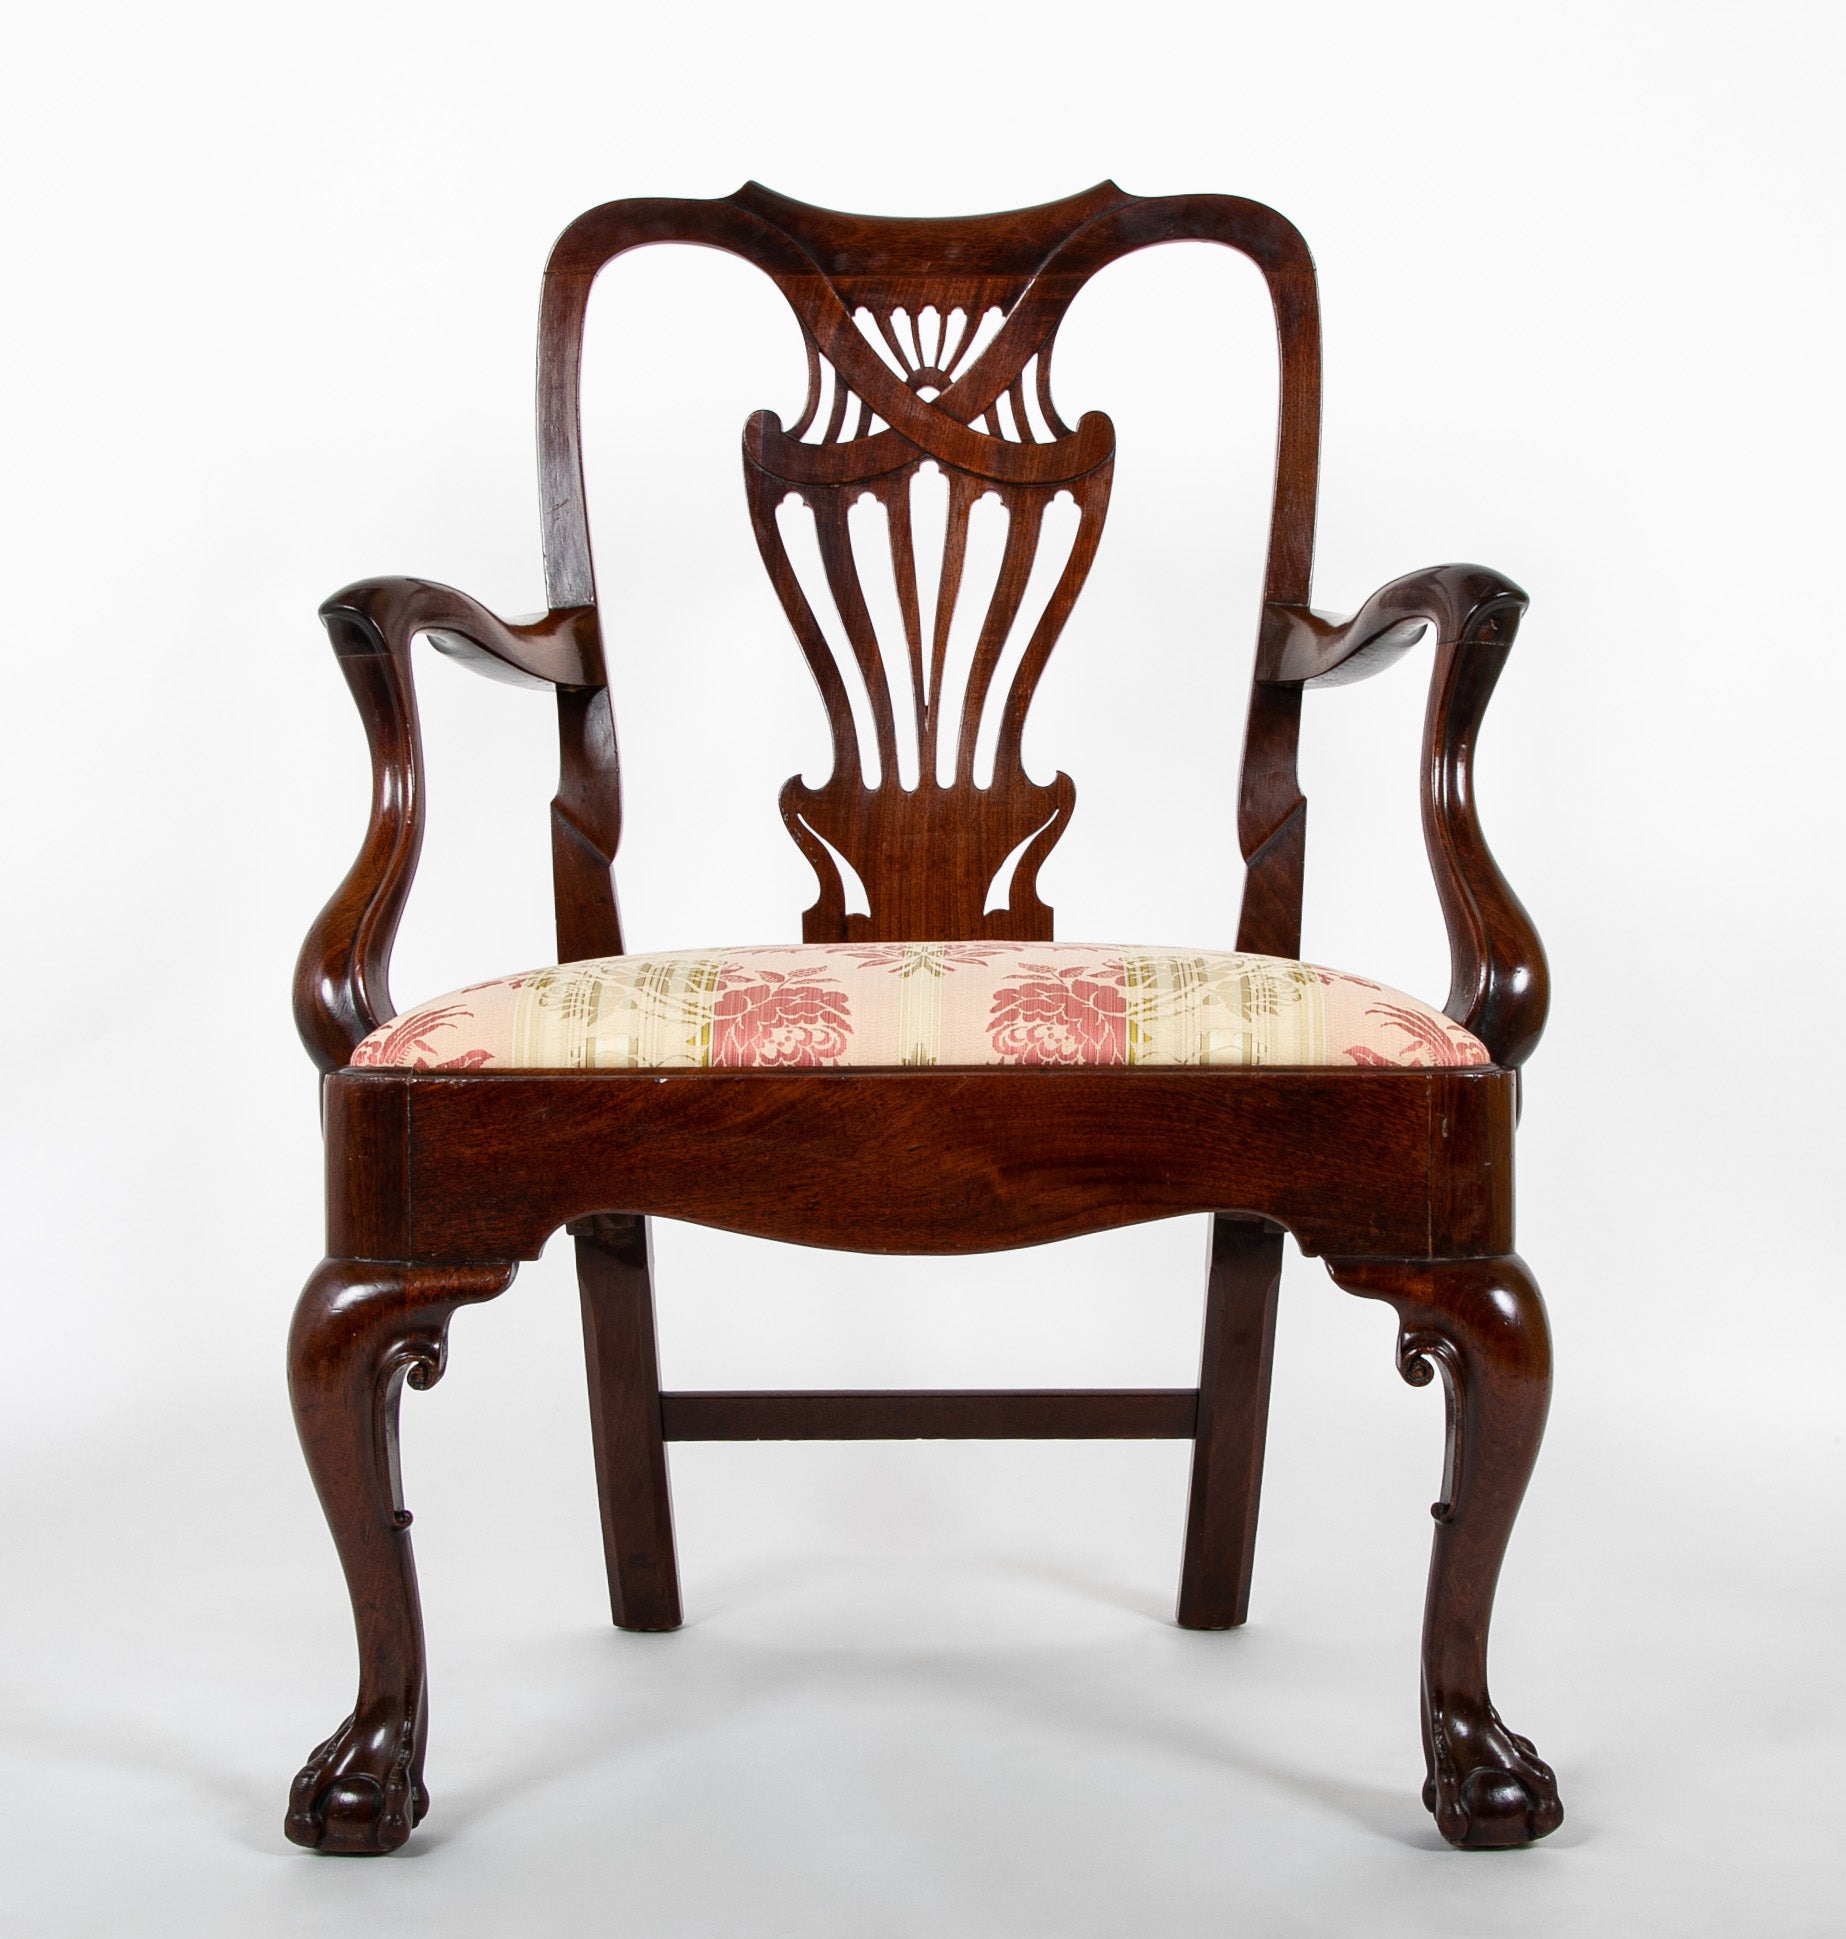 Rare Irish George II Armchair with Ball and Claw Feet and "C" Scroll Shaped Arms